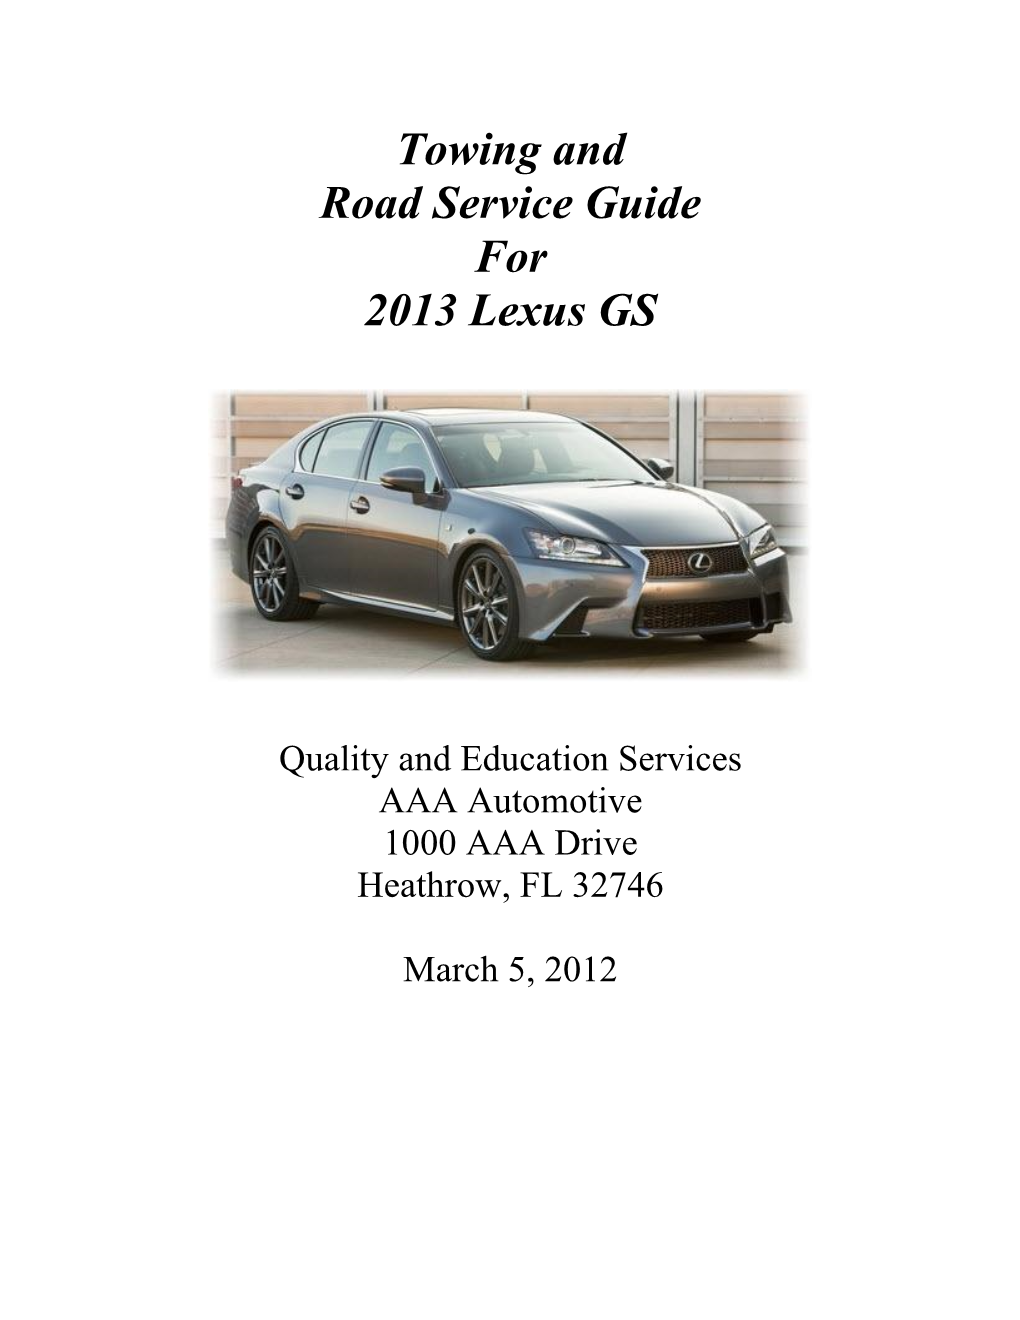 Towing and Road Service Guide for 2013 Lexus GS